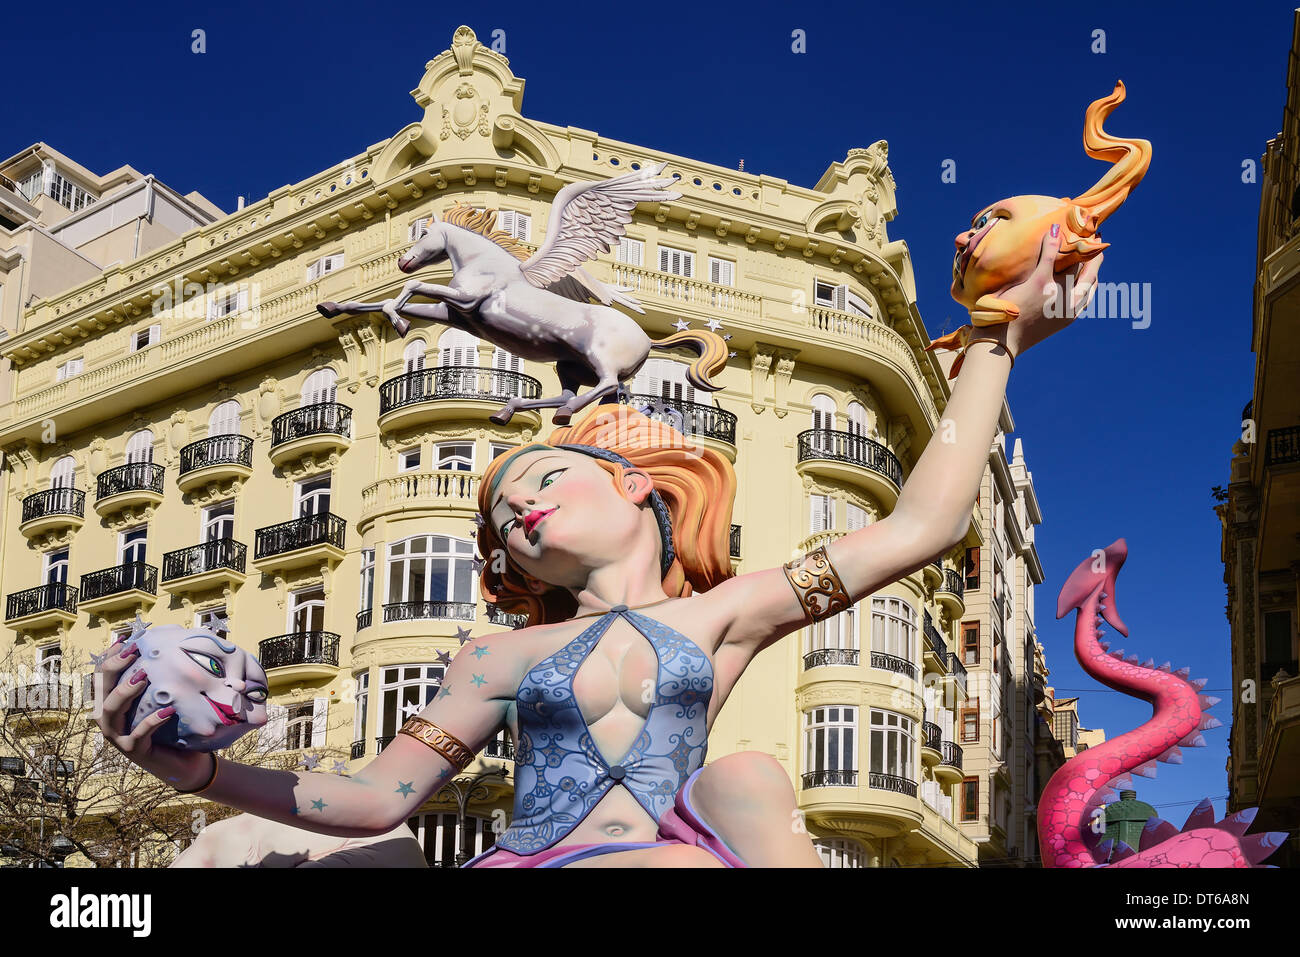 Spain, Valencia, Female Papier Mache figure with a winged horse on her head in the street during Las Fallas festival. Stock Photo